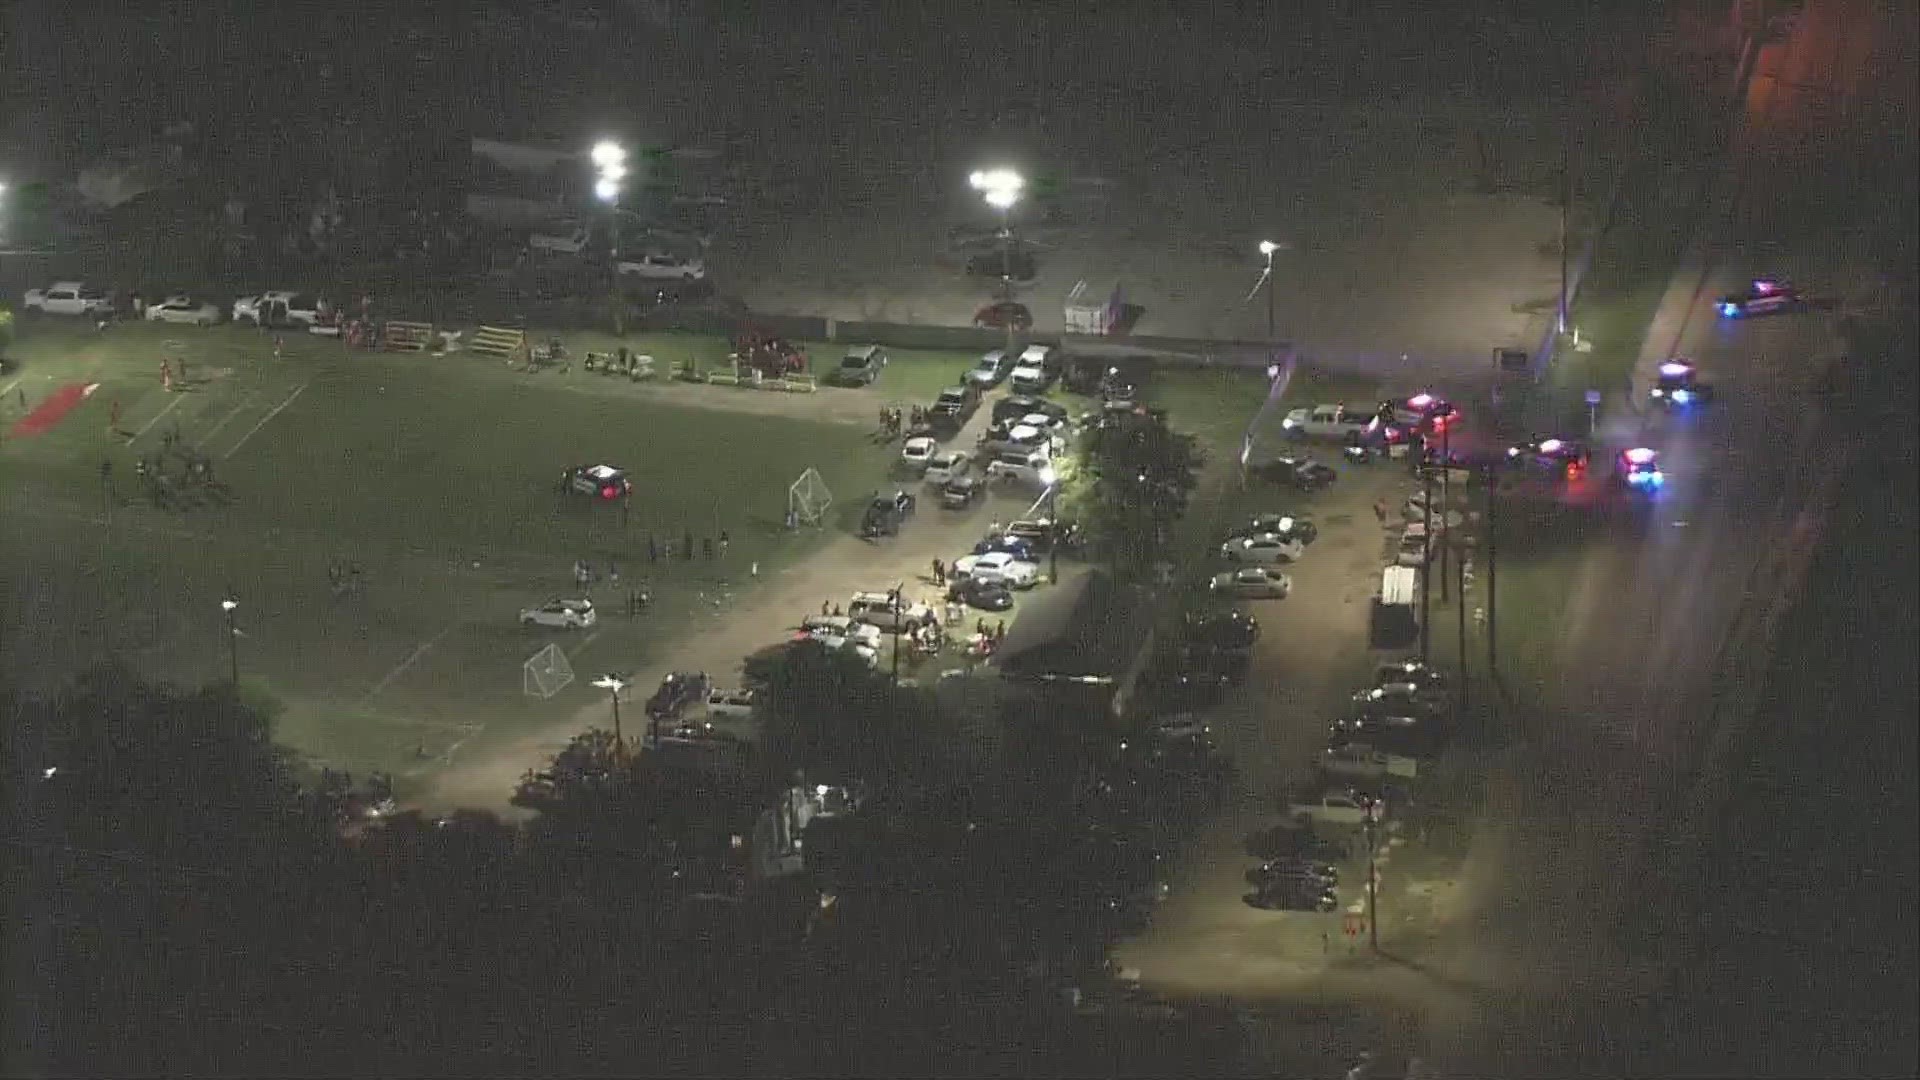 Chopper 5 was over the scene at Comanche Park on Friday night as multiple police units responded. We are working to learn more information.